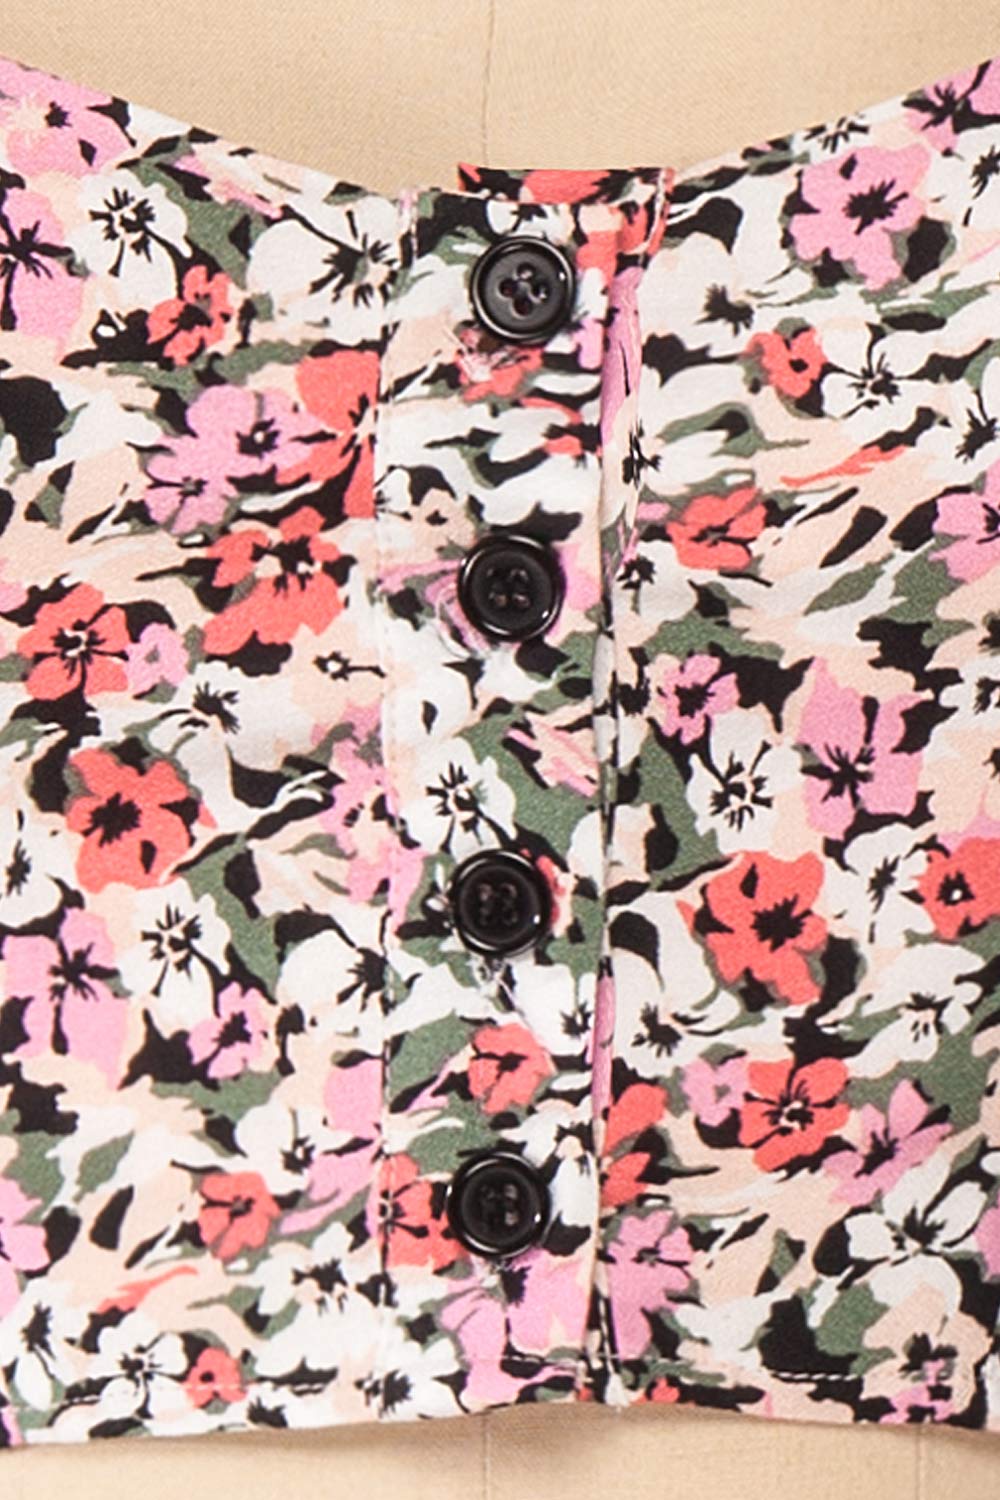 Insko Pink Floral Buttoned Crop Top | Boutique 1861 fabric details